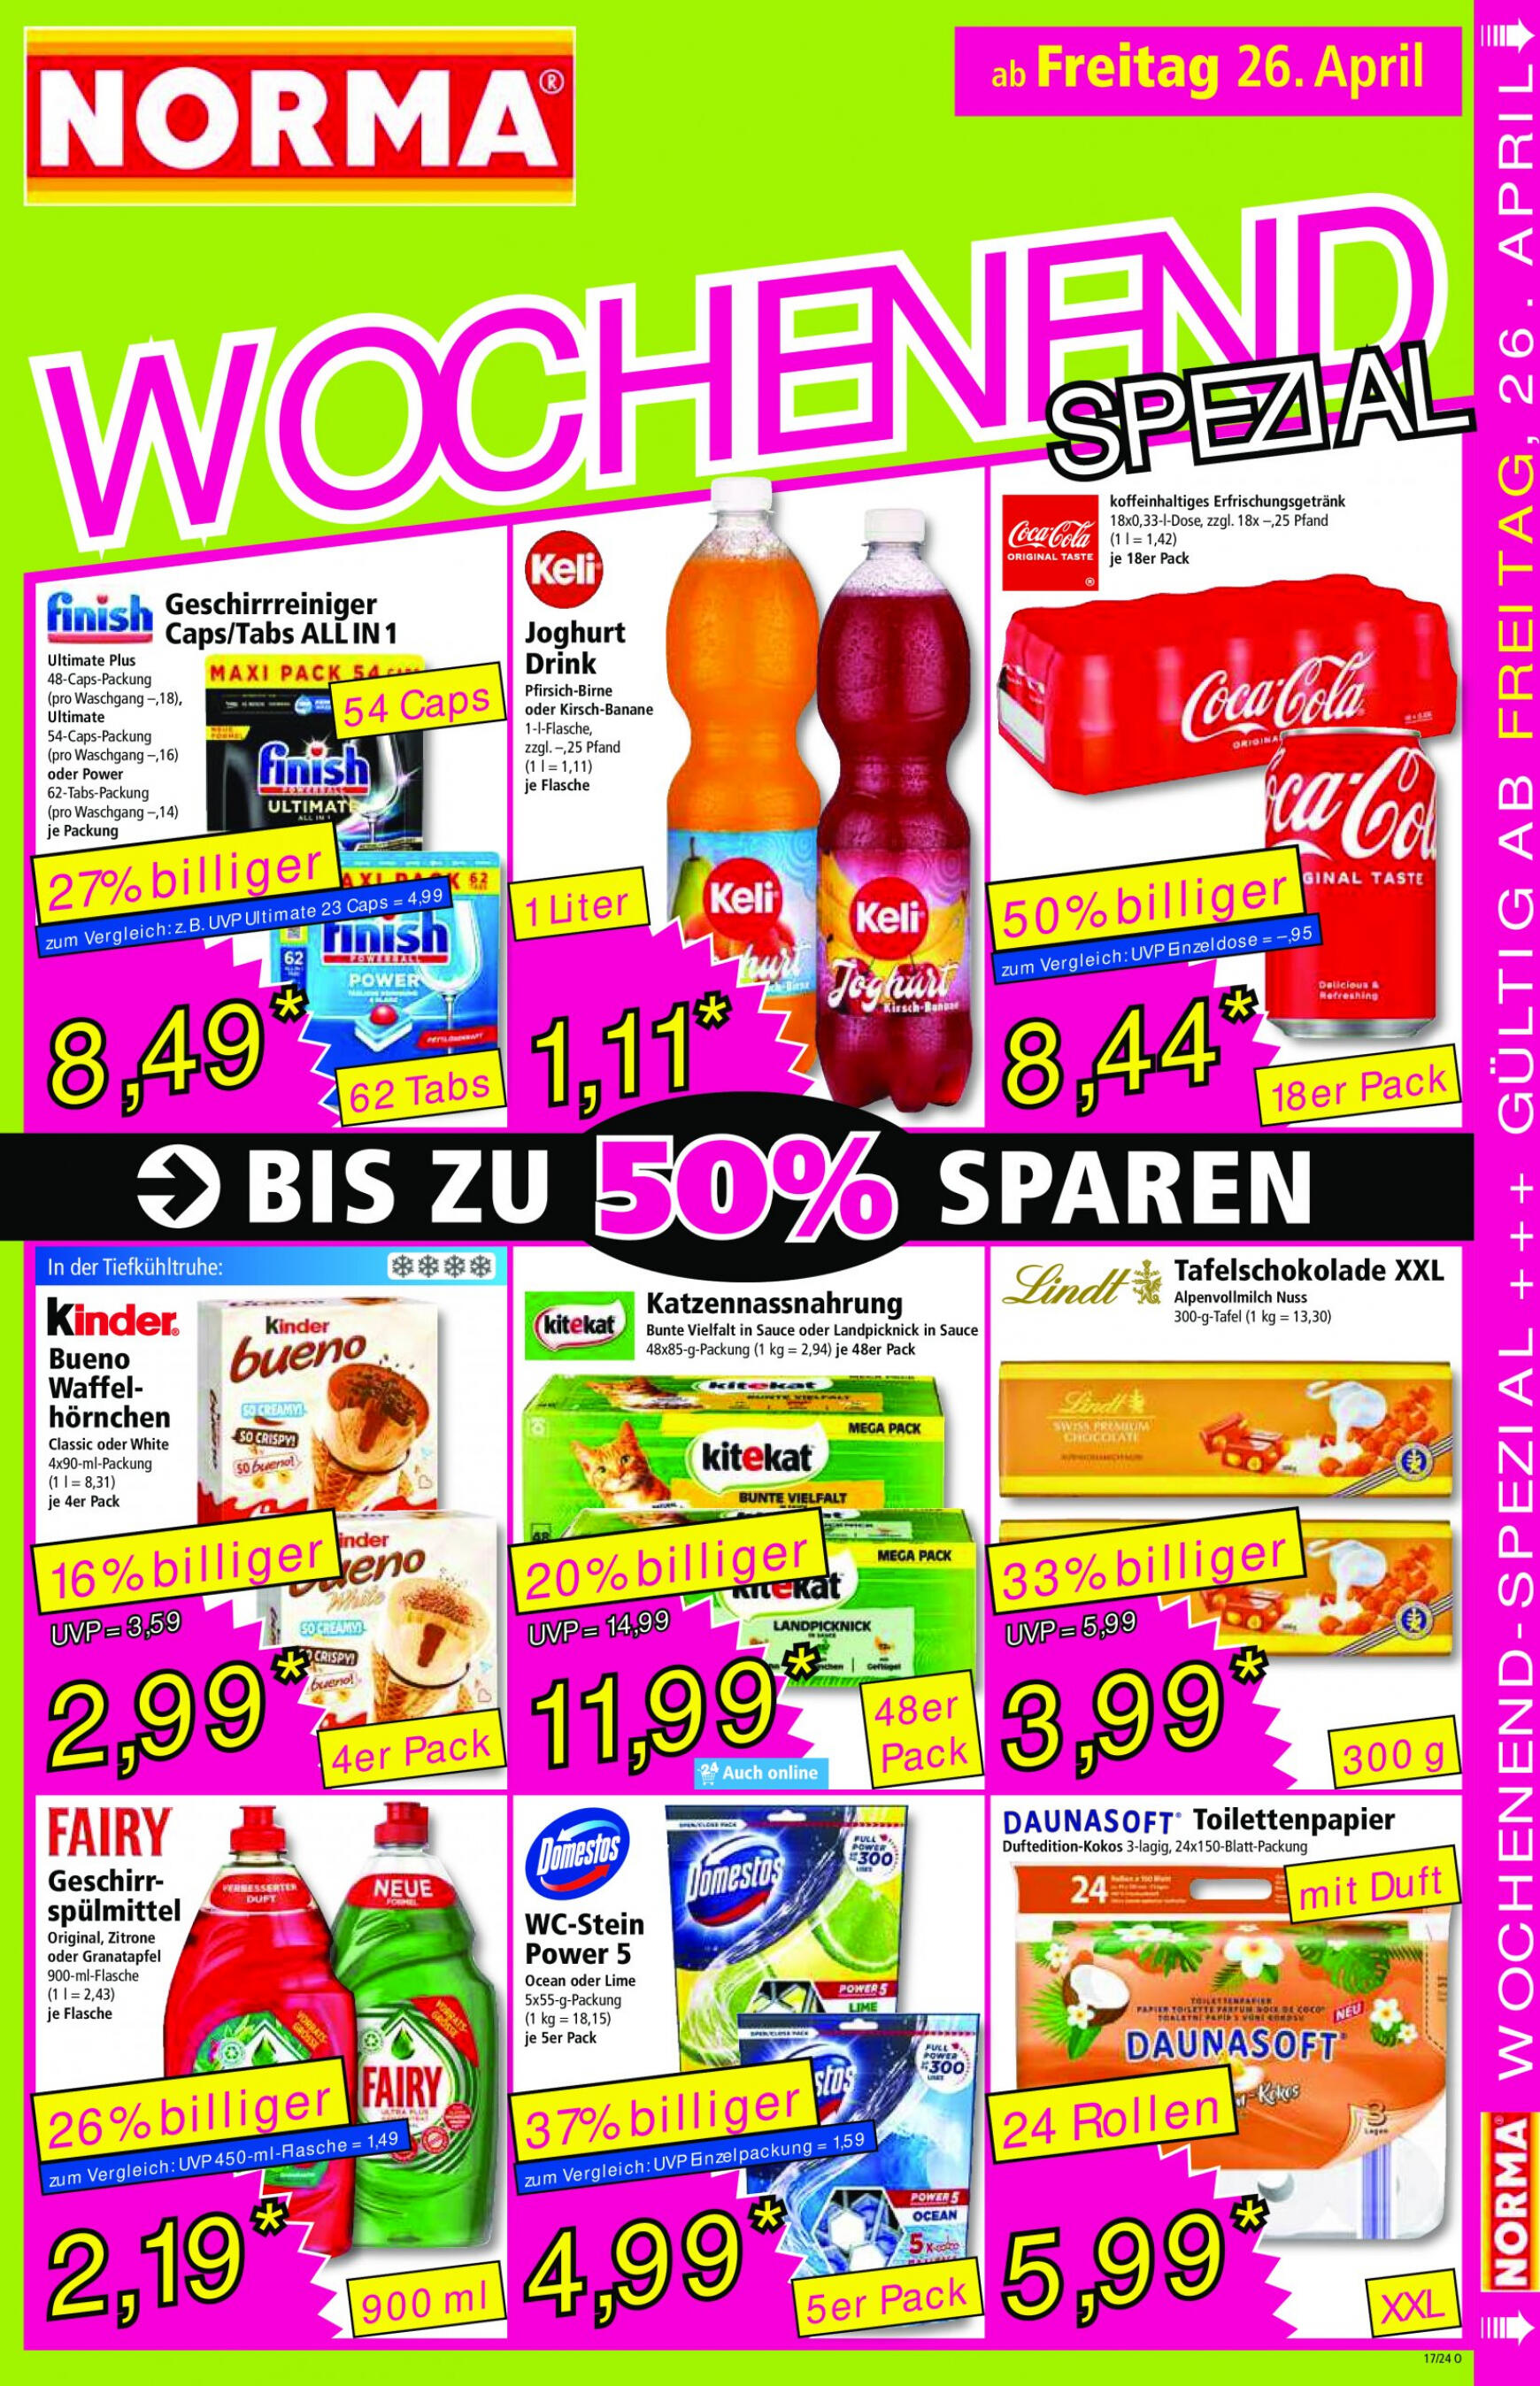 norma - Flyer Norma aktuell 22.04. - 27.04. - page: 17